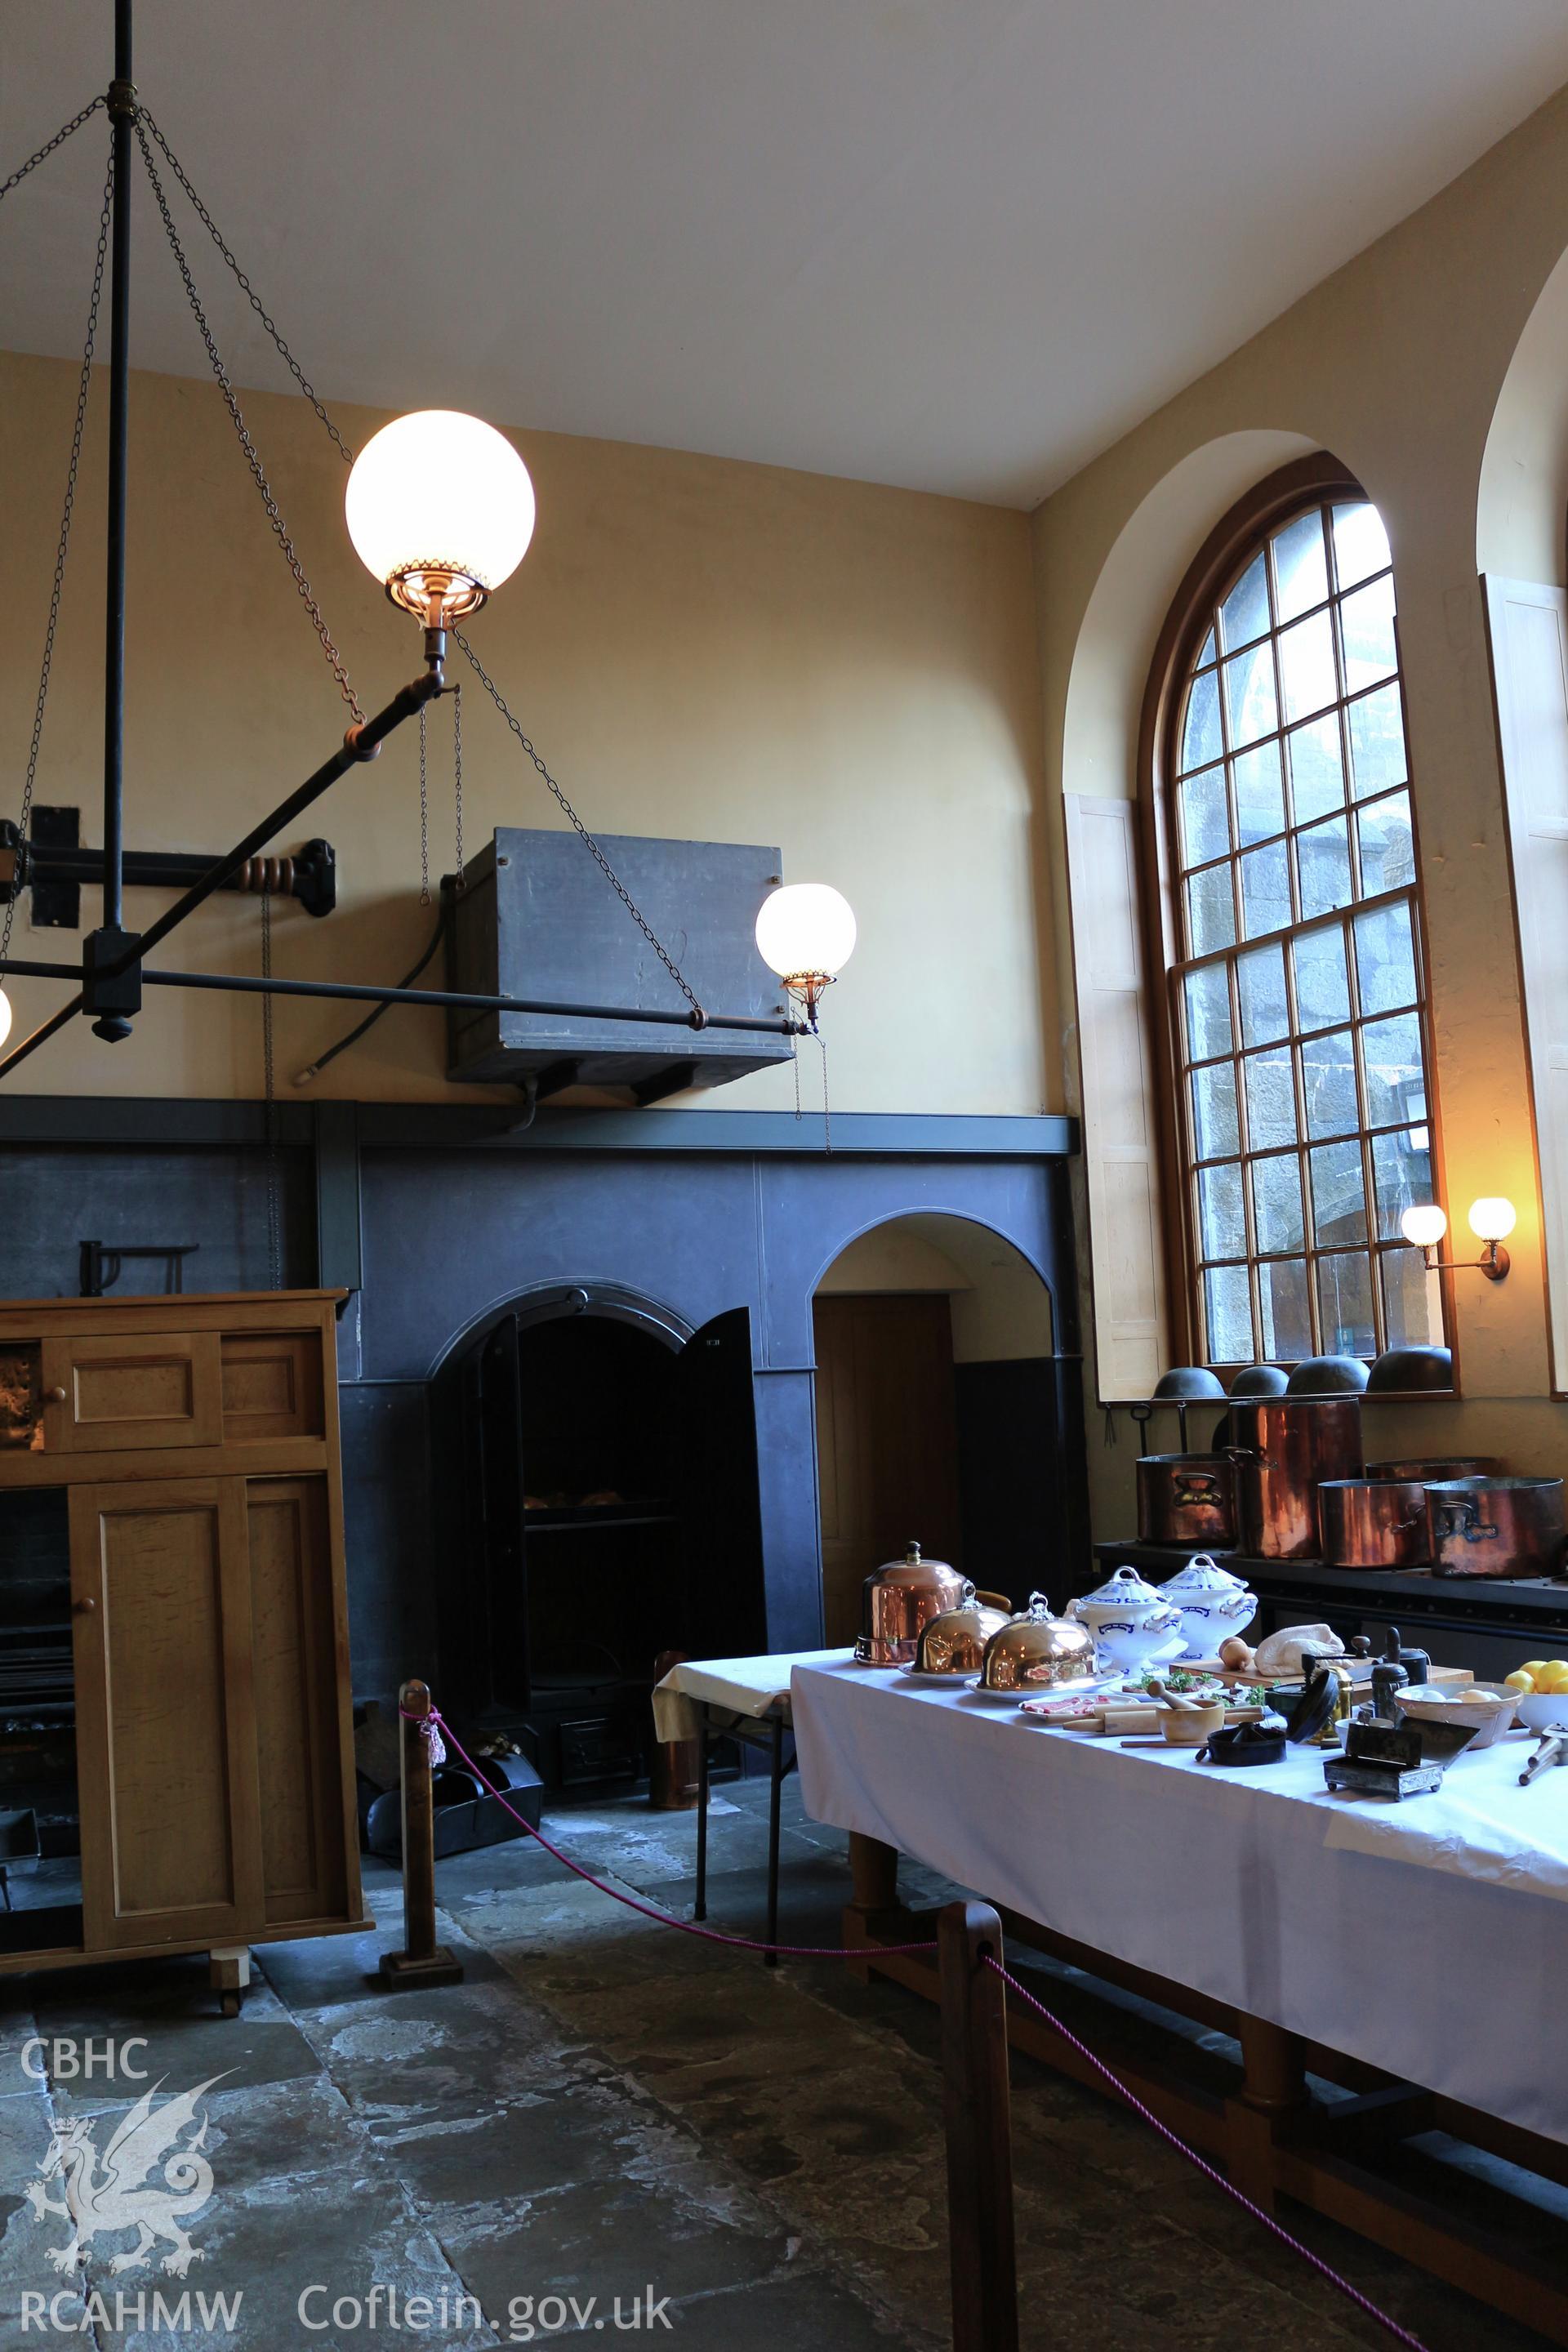 Photographic survey of Penrhyn Castle, Bangor. Kitchens, display of kitchen ware.